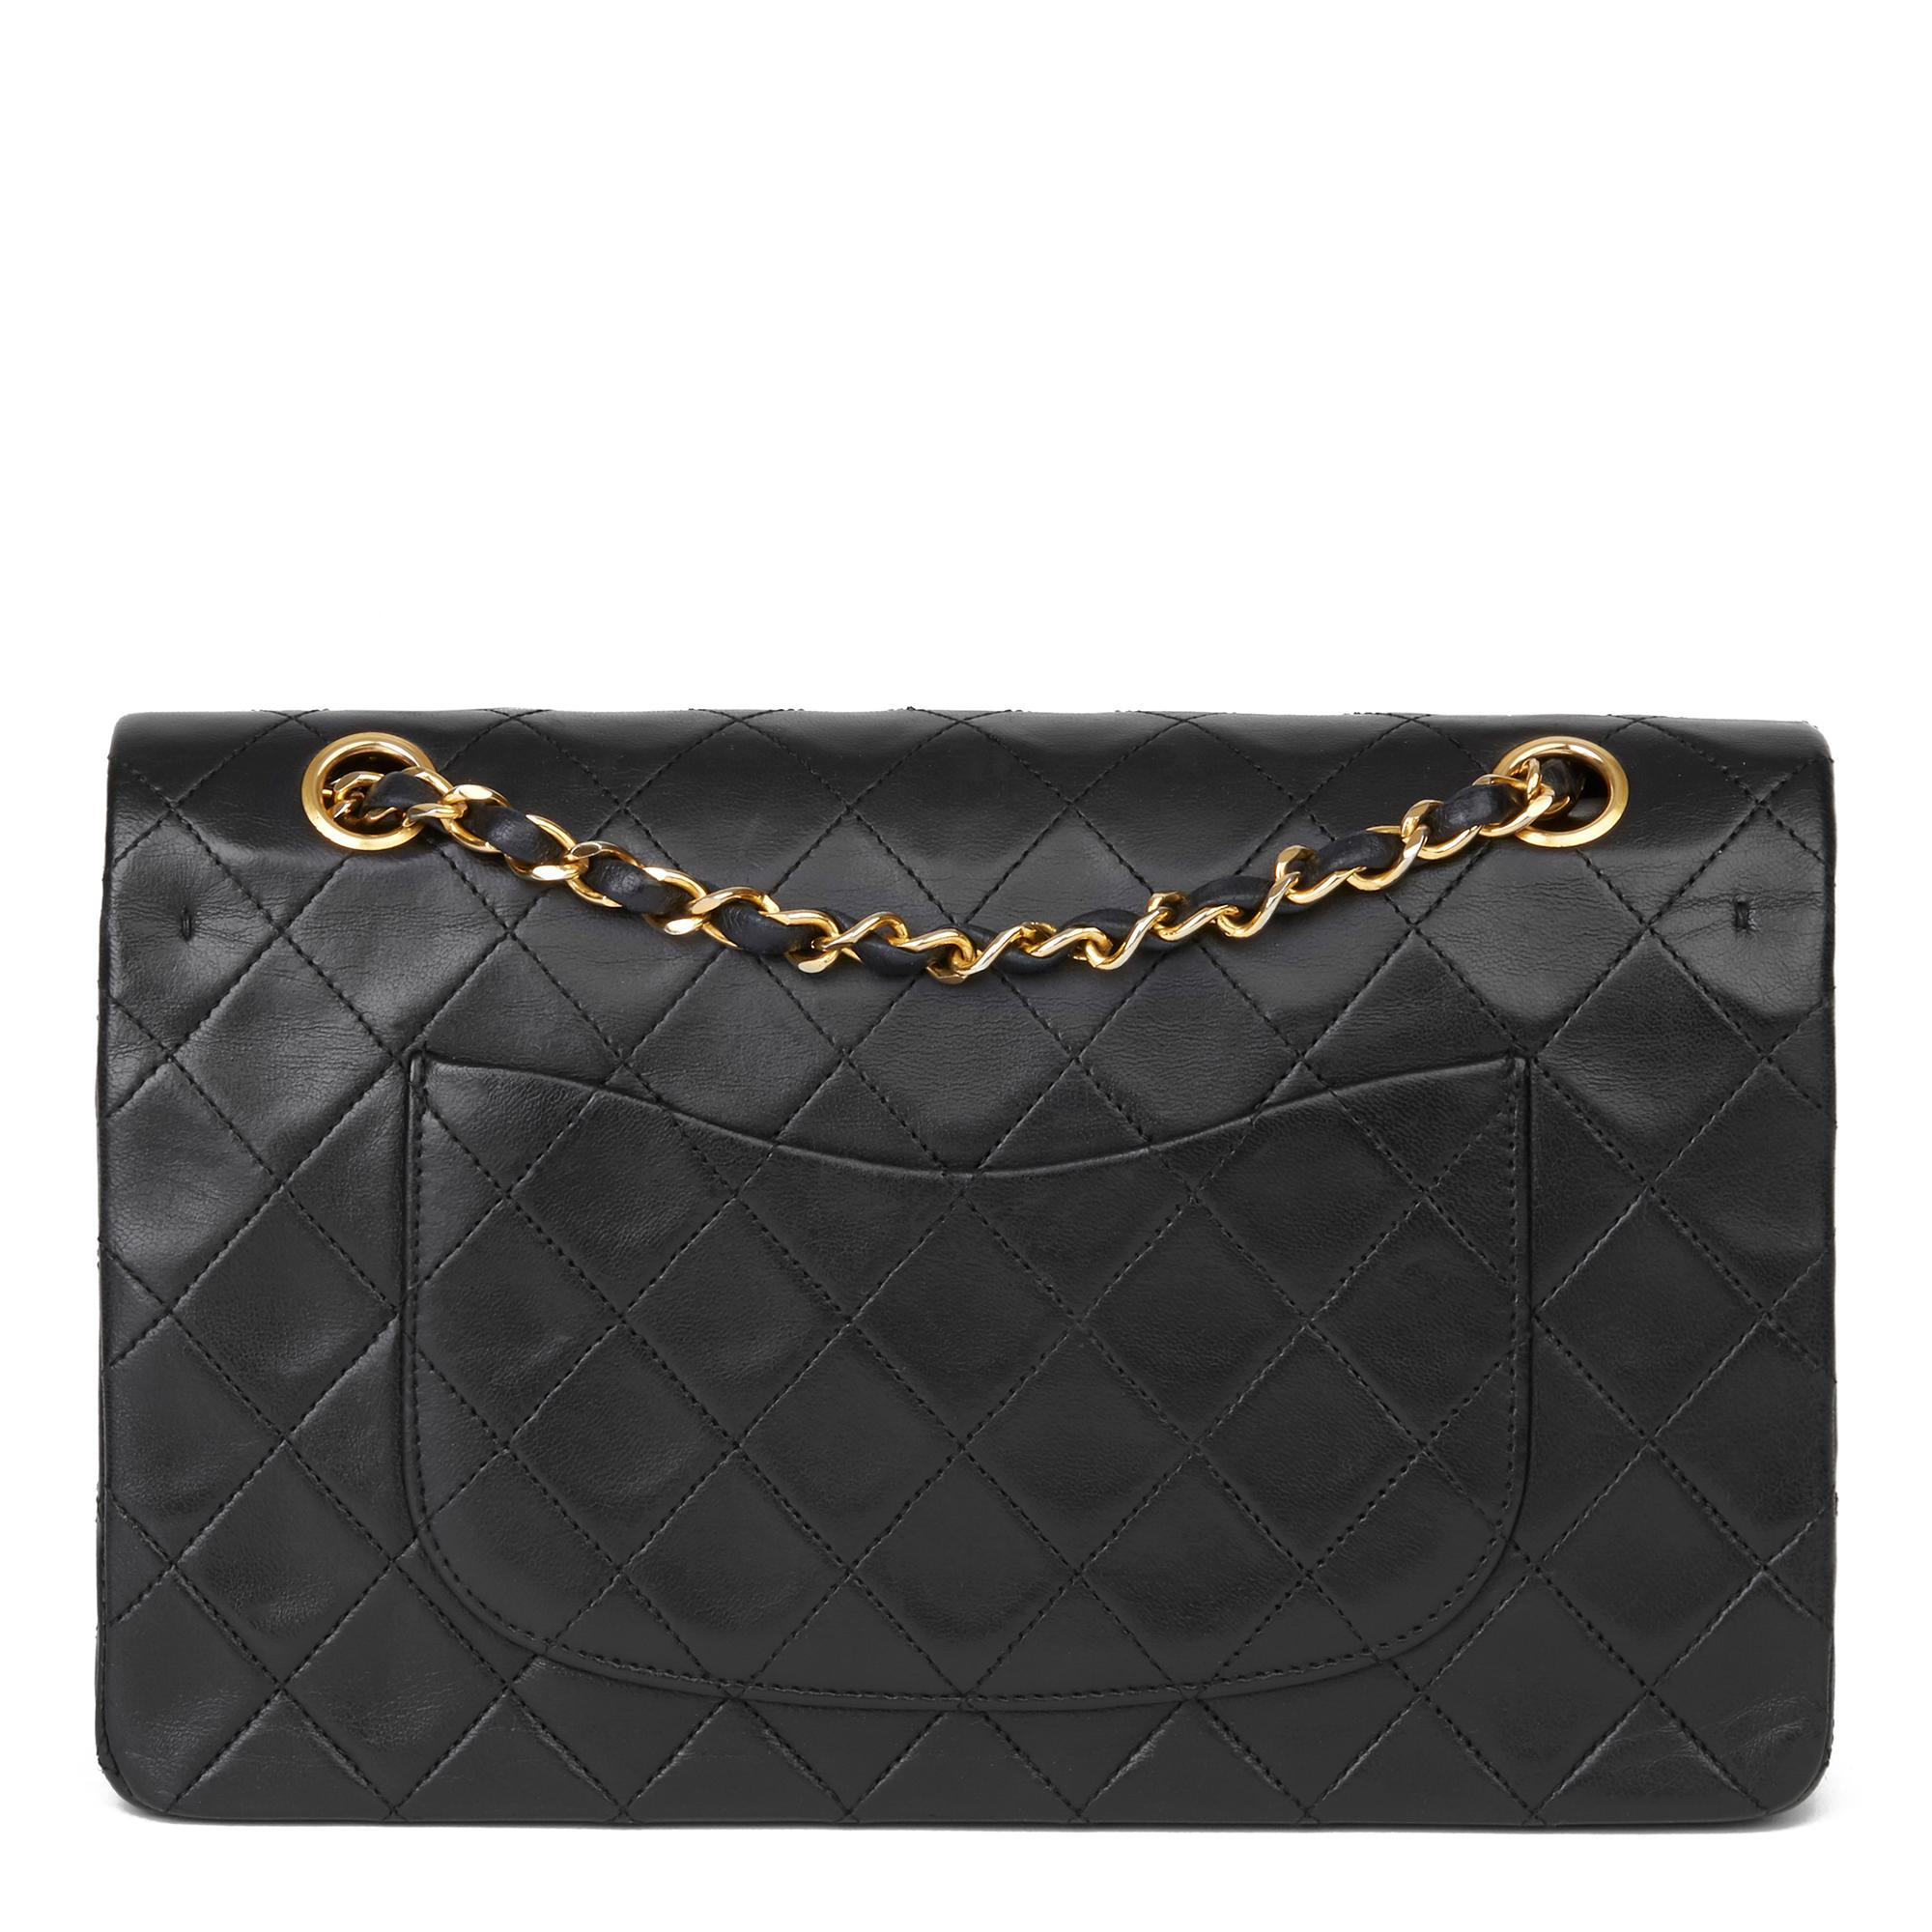 1989 Chanel Black Quilted Lambskin Vintage Medium Classic Double Flap Bag  1